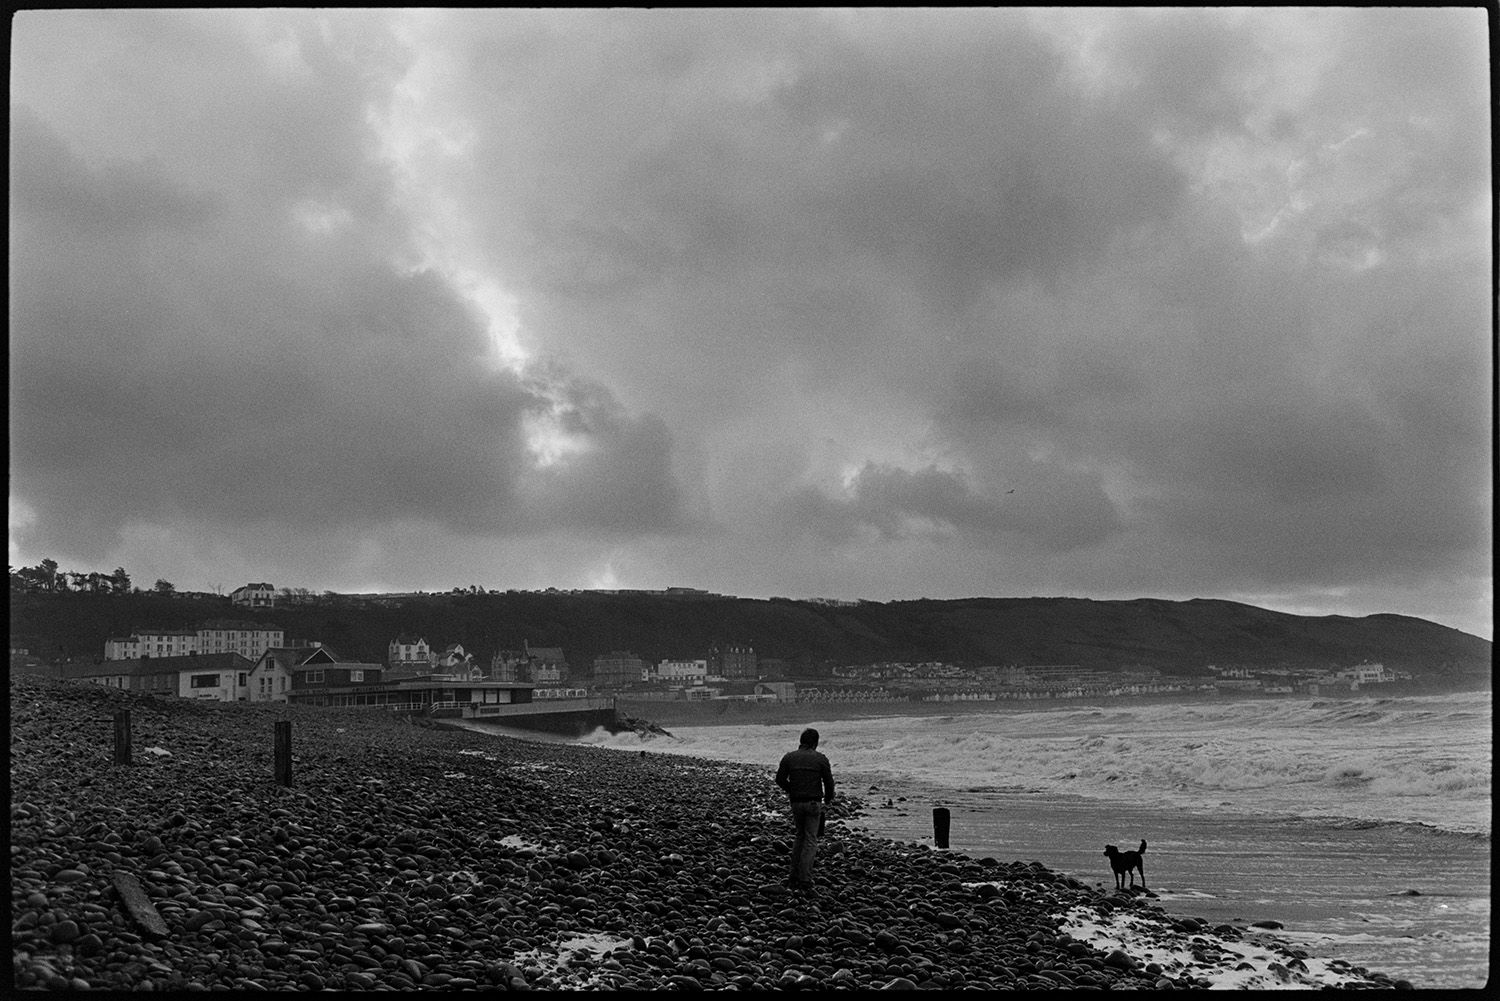 People walking beside stormy sea, leaning on the wind.
[A man walking his dog on the pebbles on Westward Ho! beach. A stormy sky and waves rolling in on the shoreline are visible.]